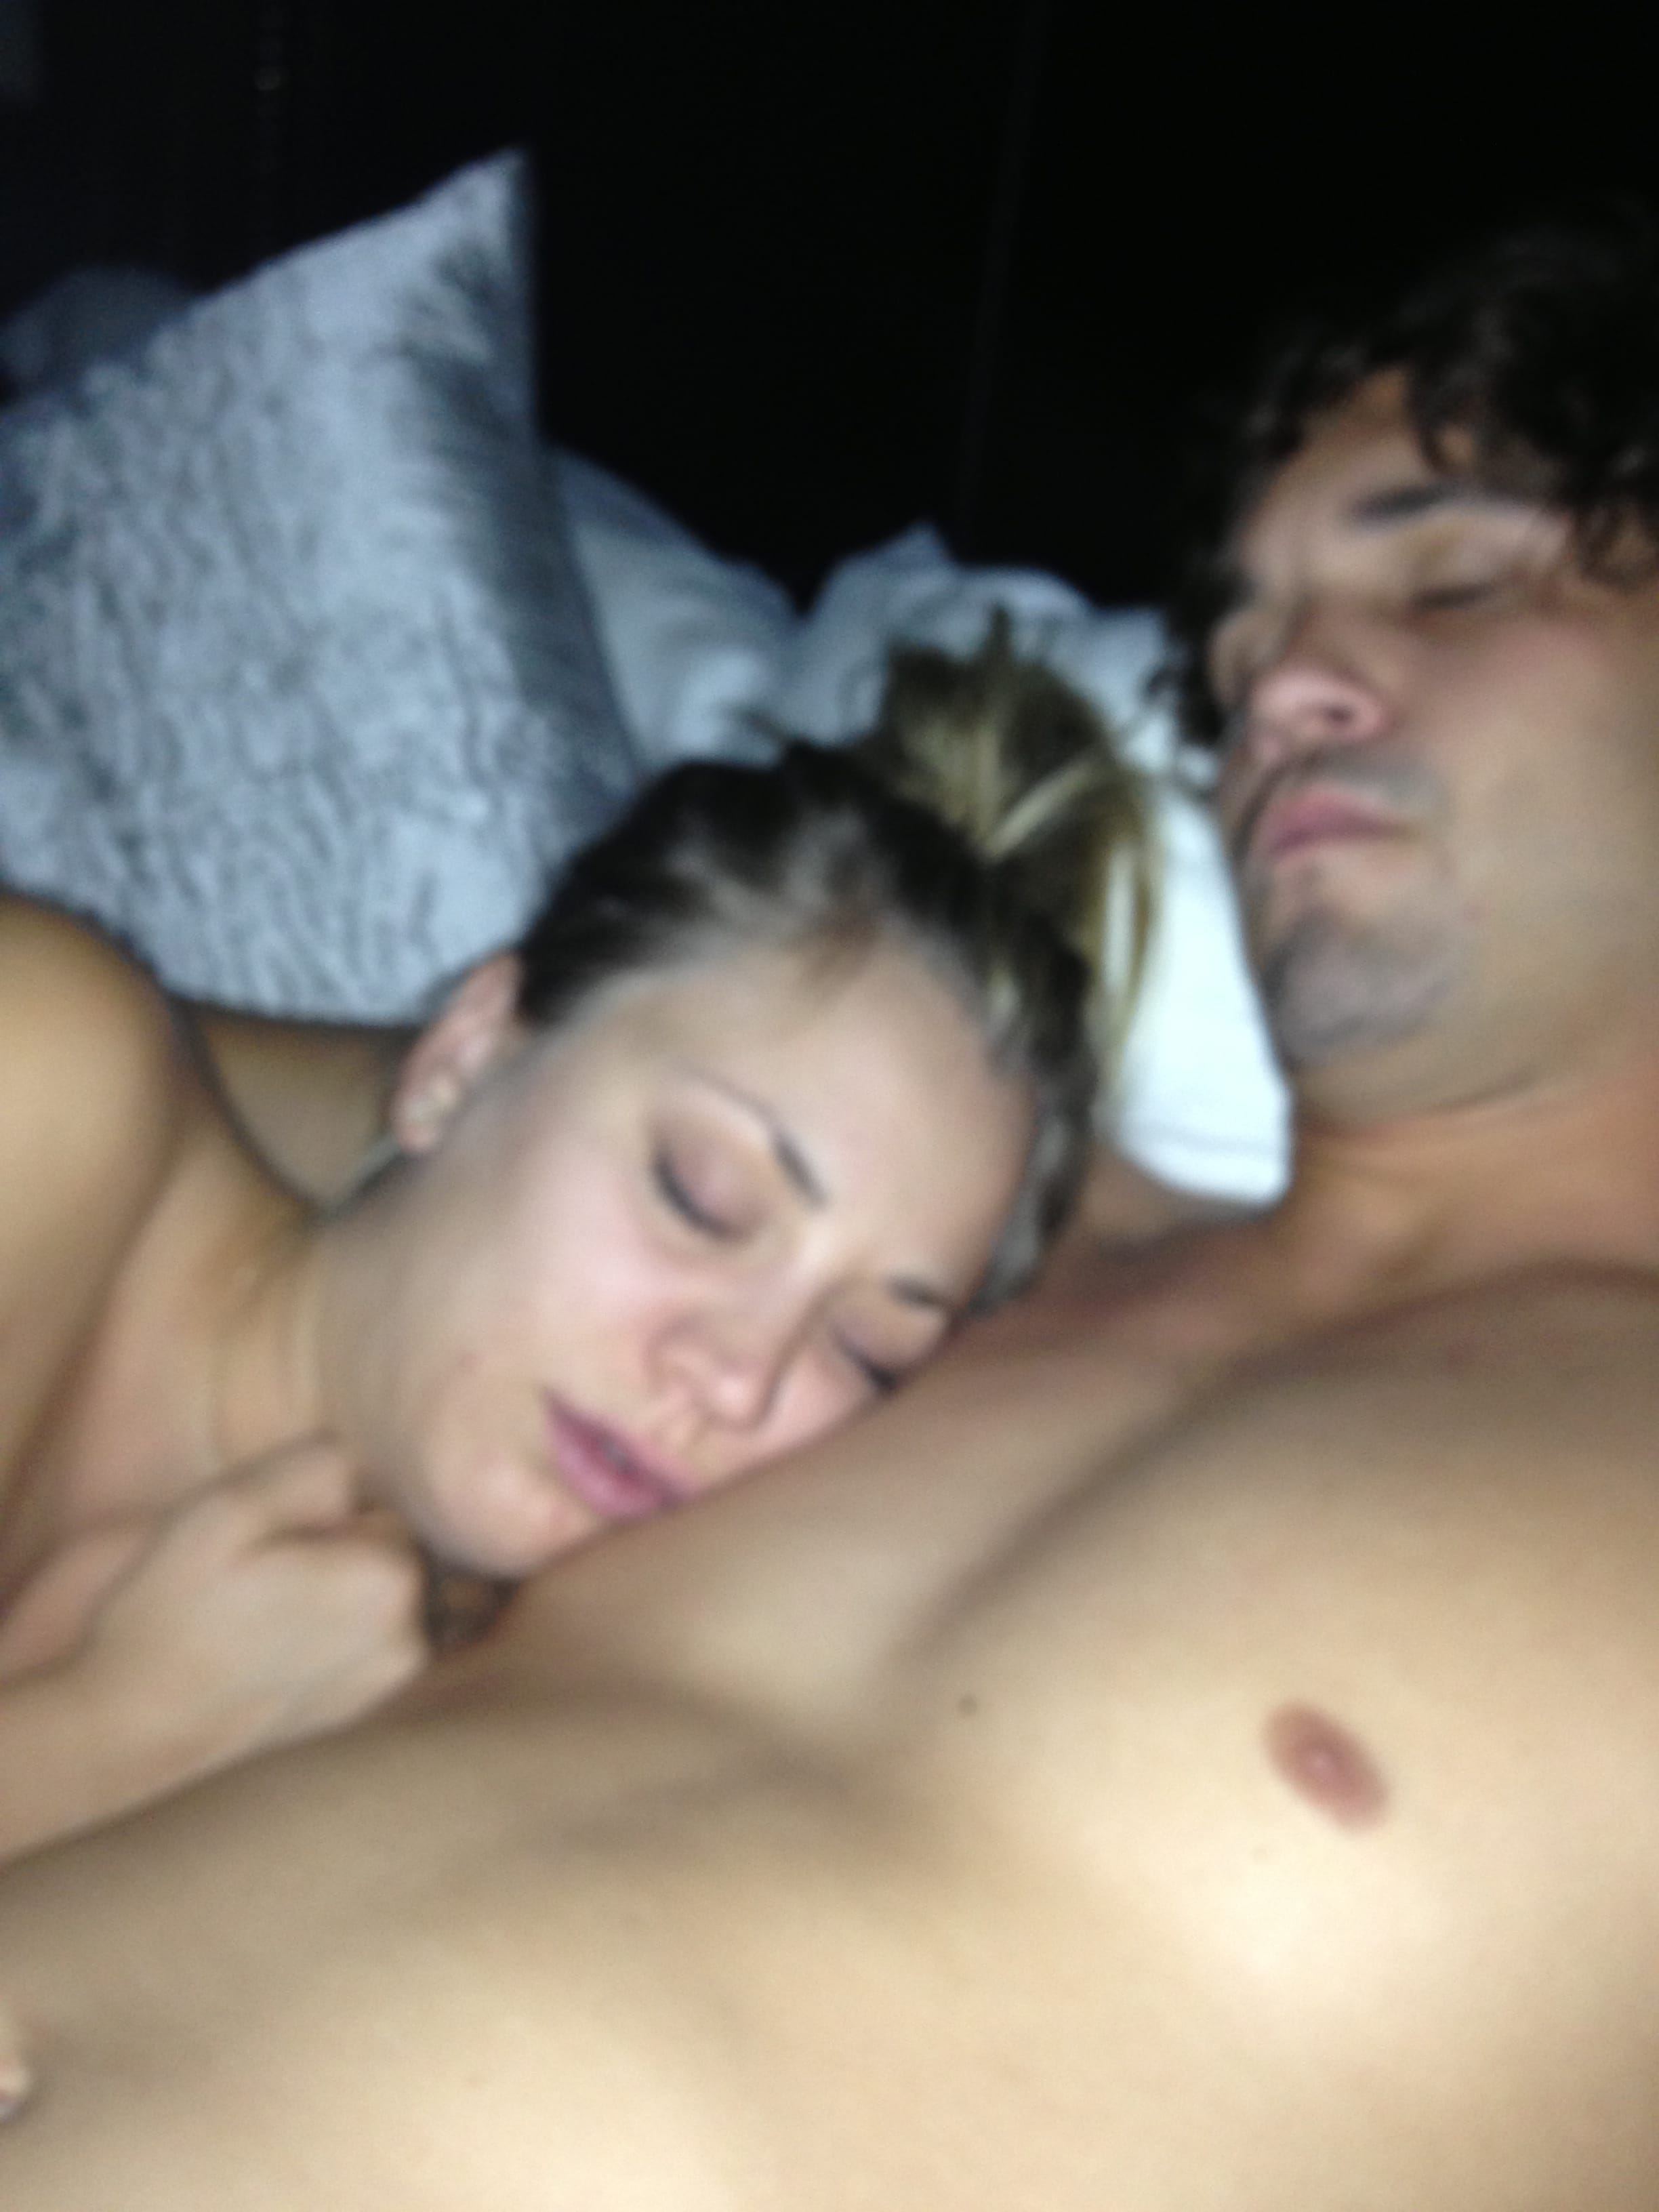 leaked pic of kaley cuoco and her husband after sex